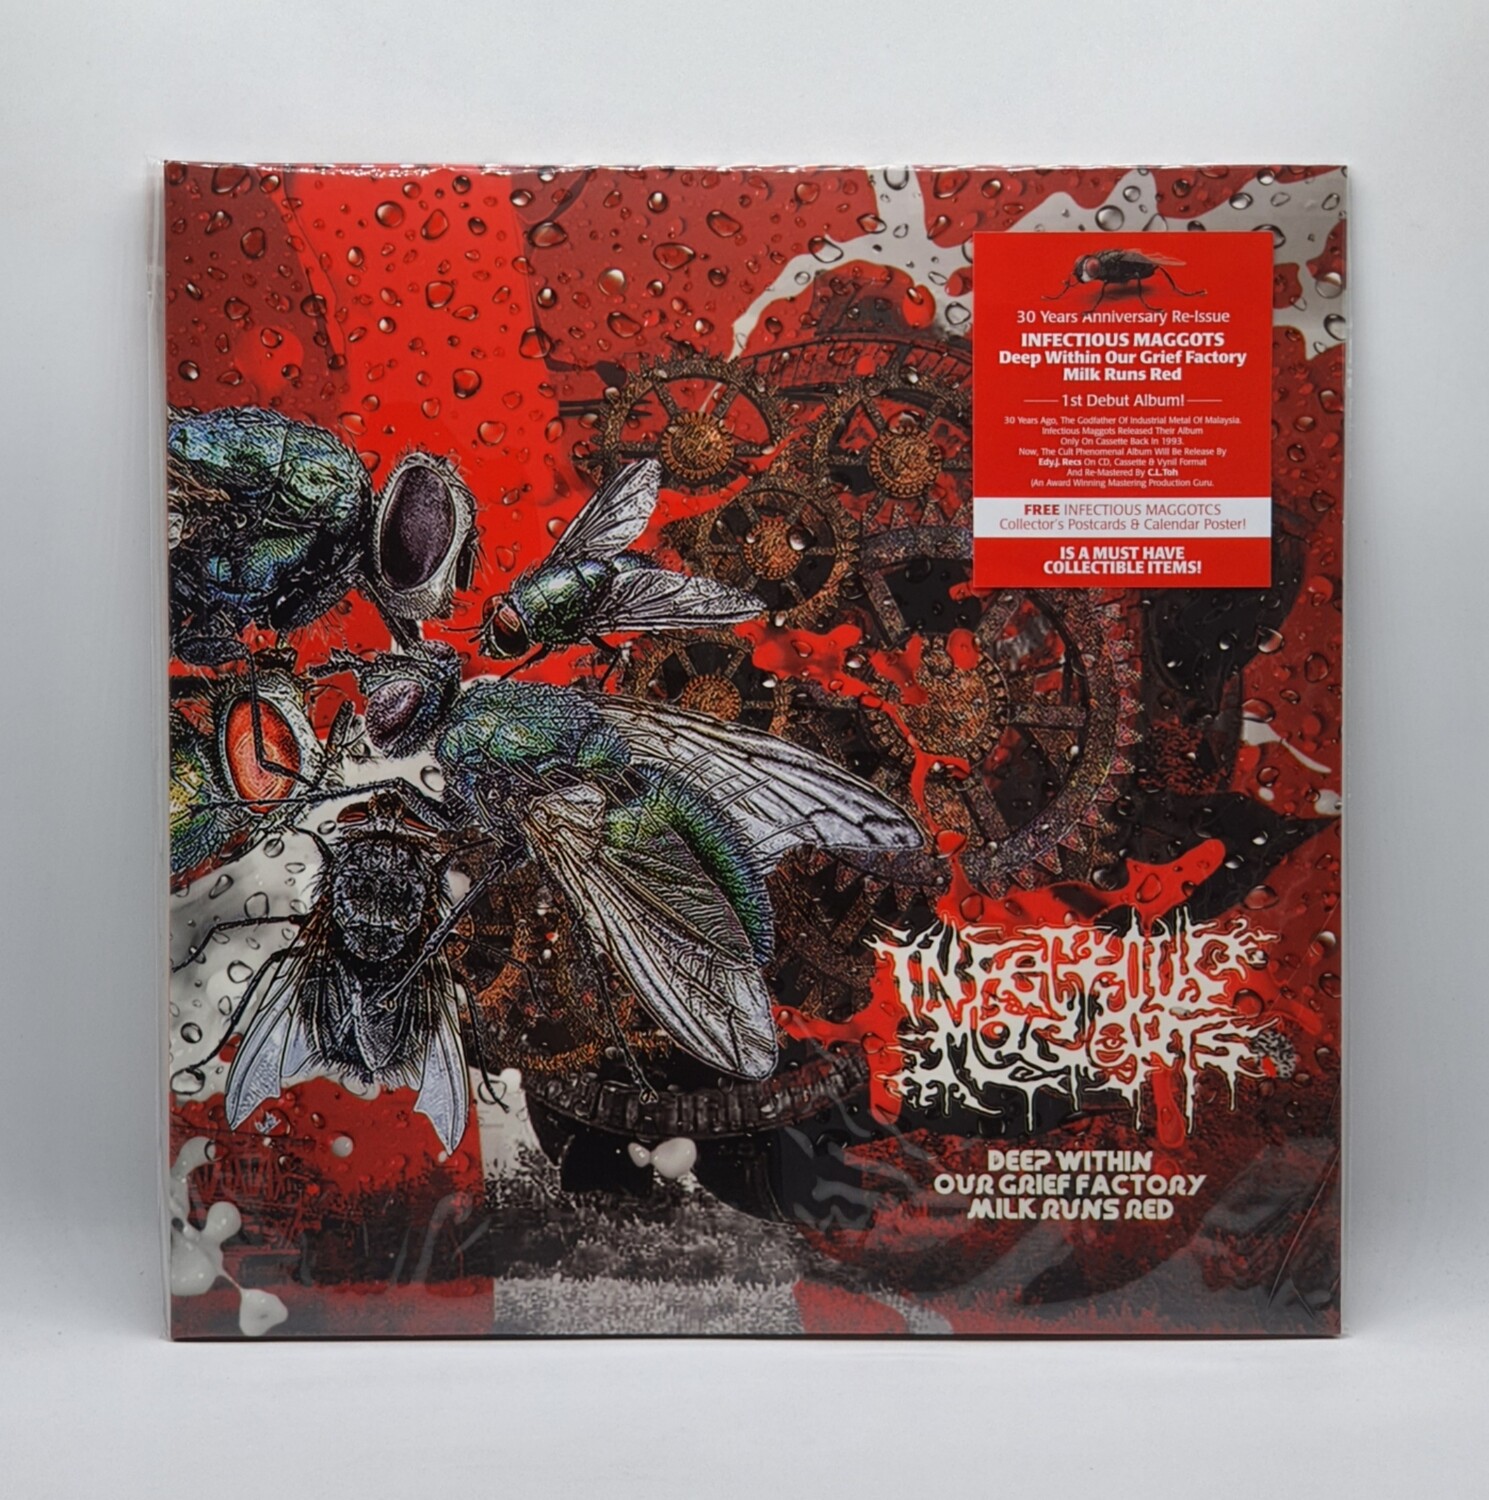 INFECTIOUS MAGGOTS -DEEP WITHIN OUR GRIEF FACTORY MILK RUN RED- LP